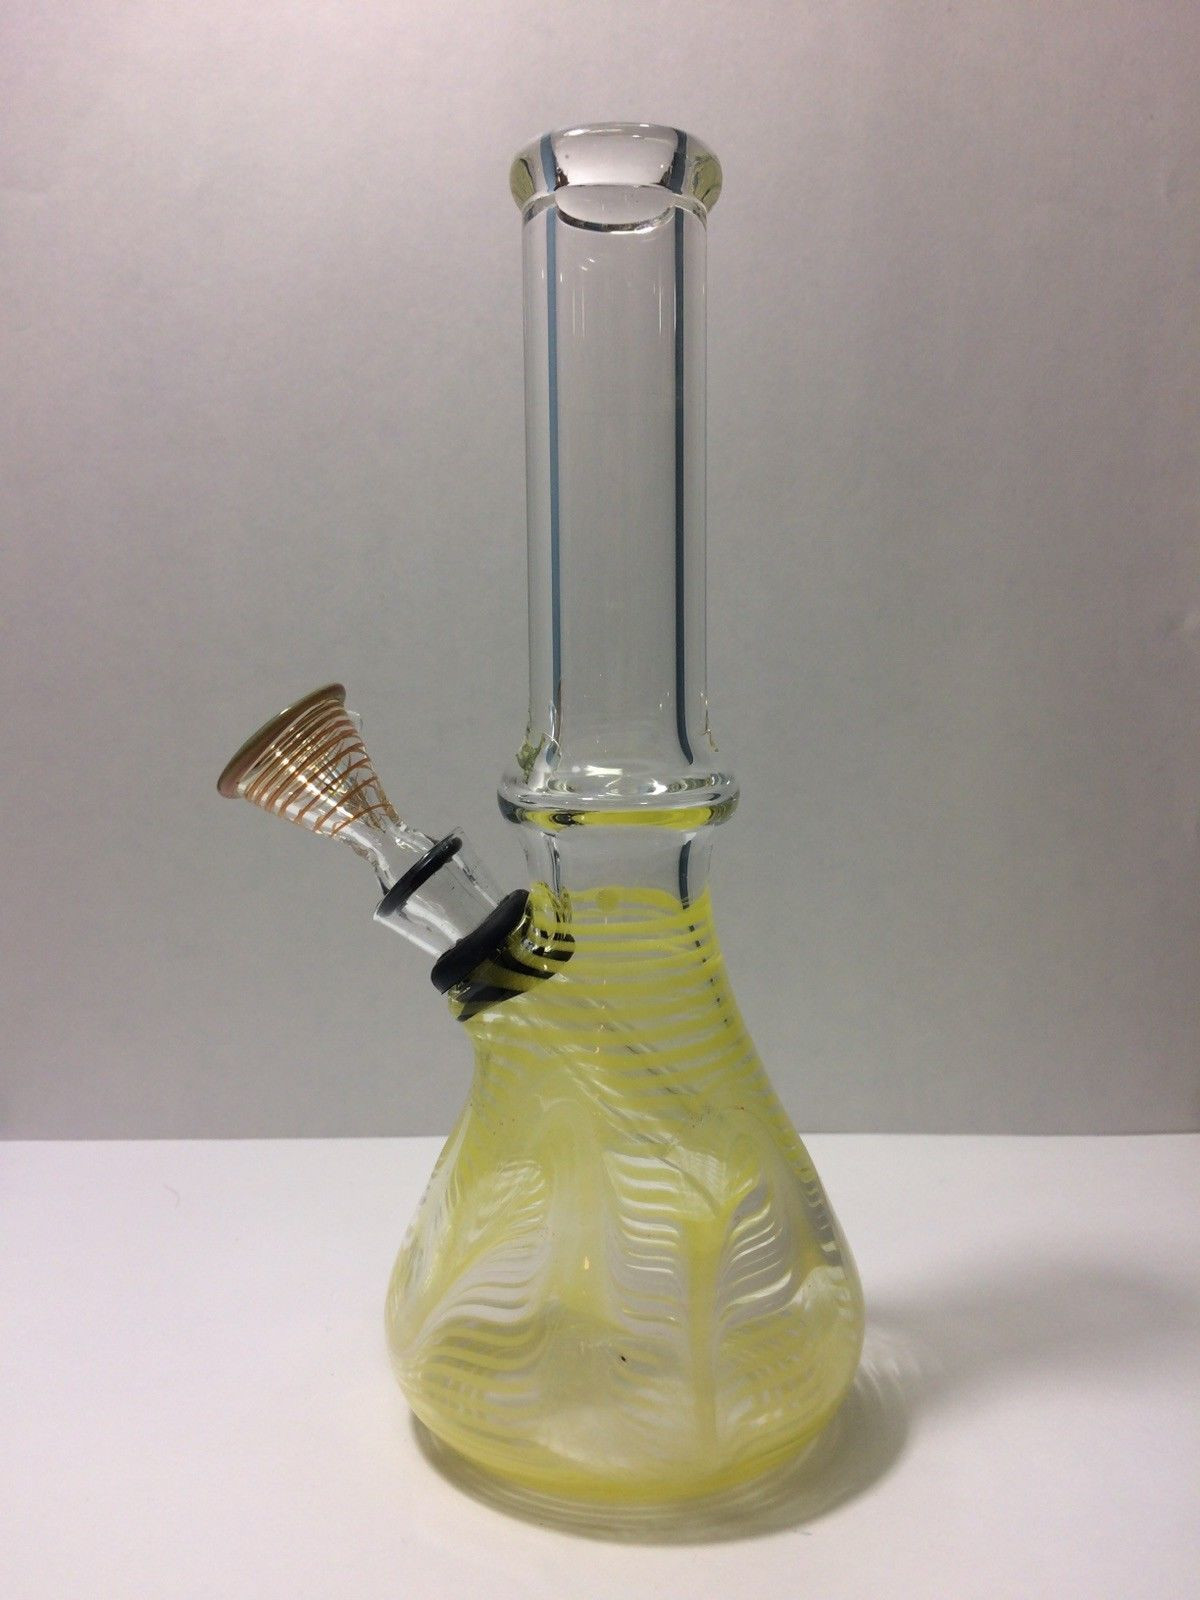 tall thick glass vase of us 25 00 7 inch tall beaker bong made in usa fast discreet within us 25 00 7 inch tall beaker bong made in usa fast discreet shipping leave a message note with your color of choice when you purchase or a blue one will